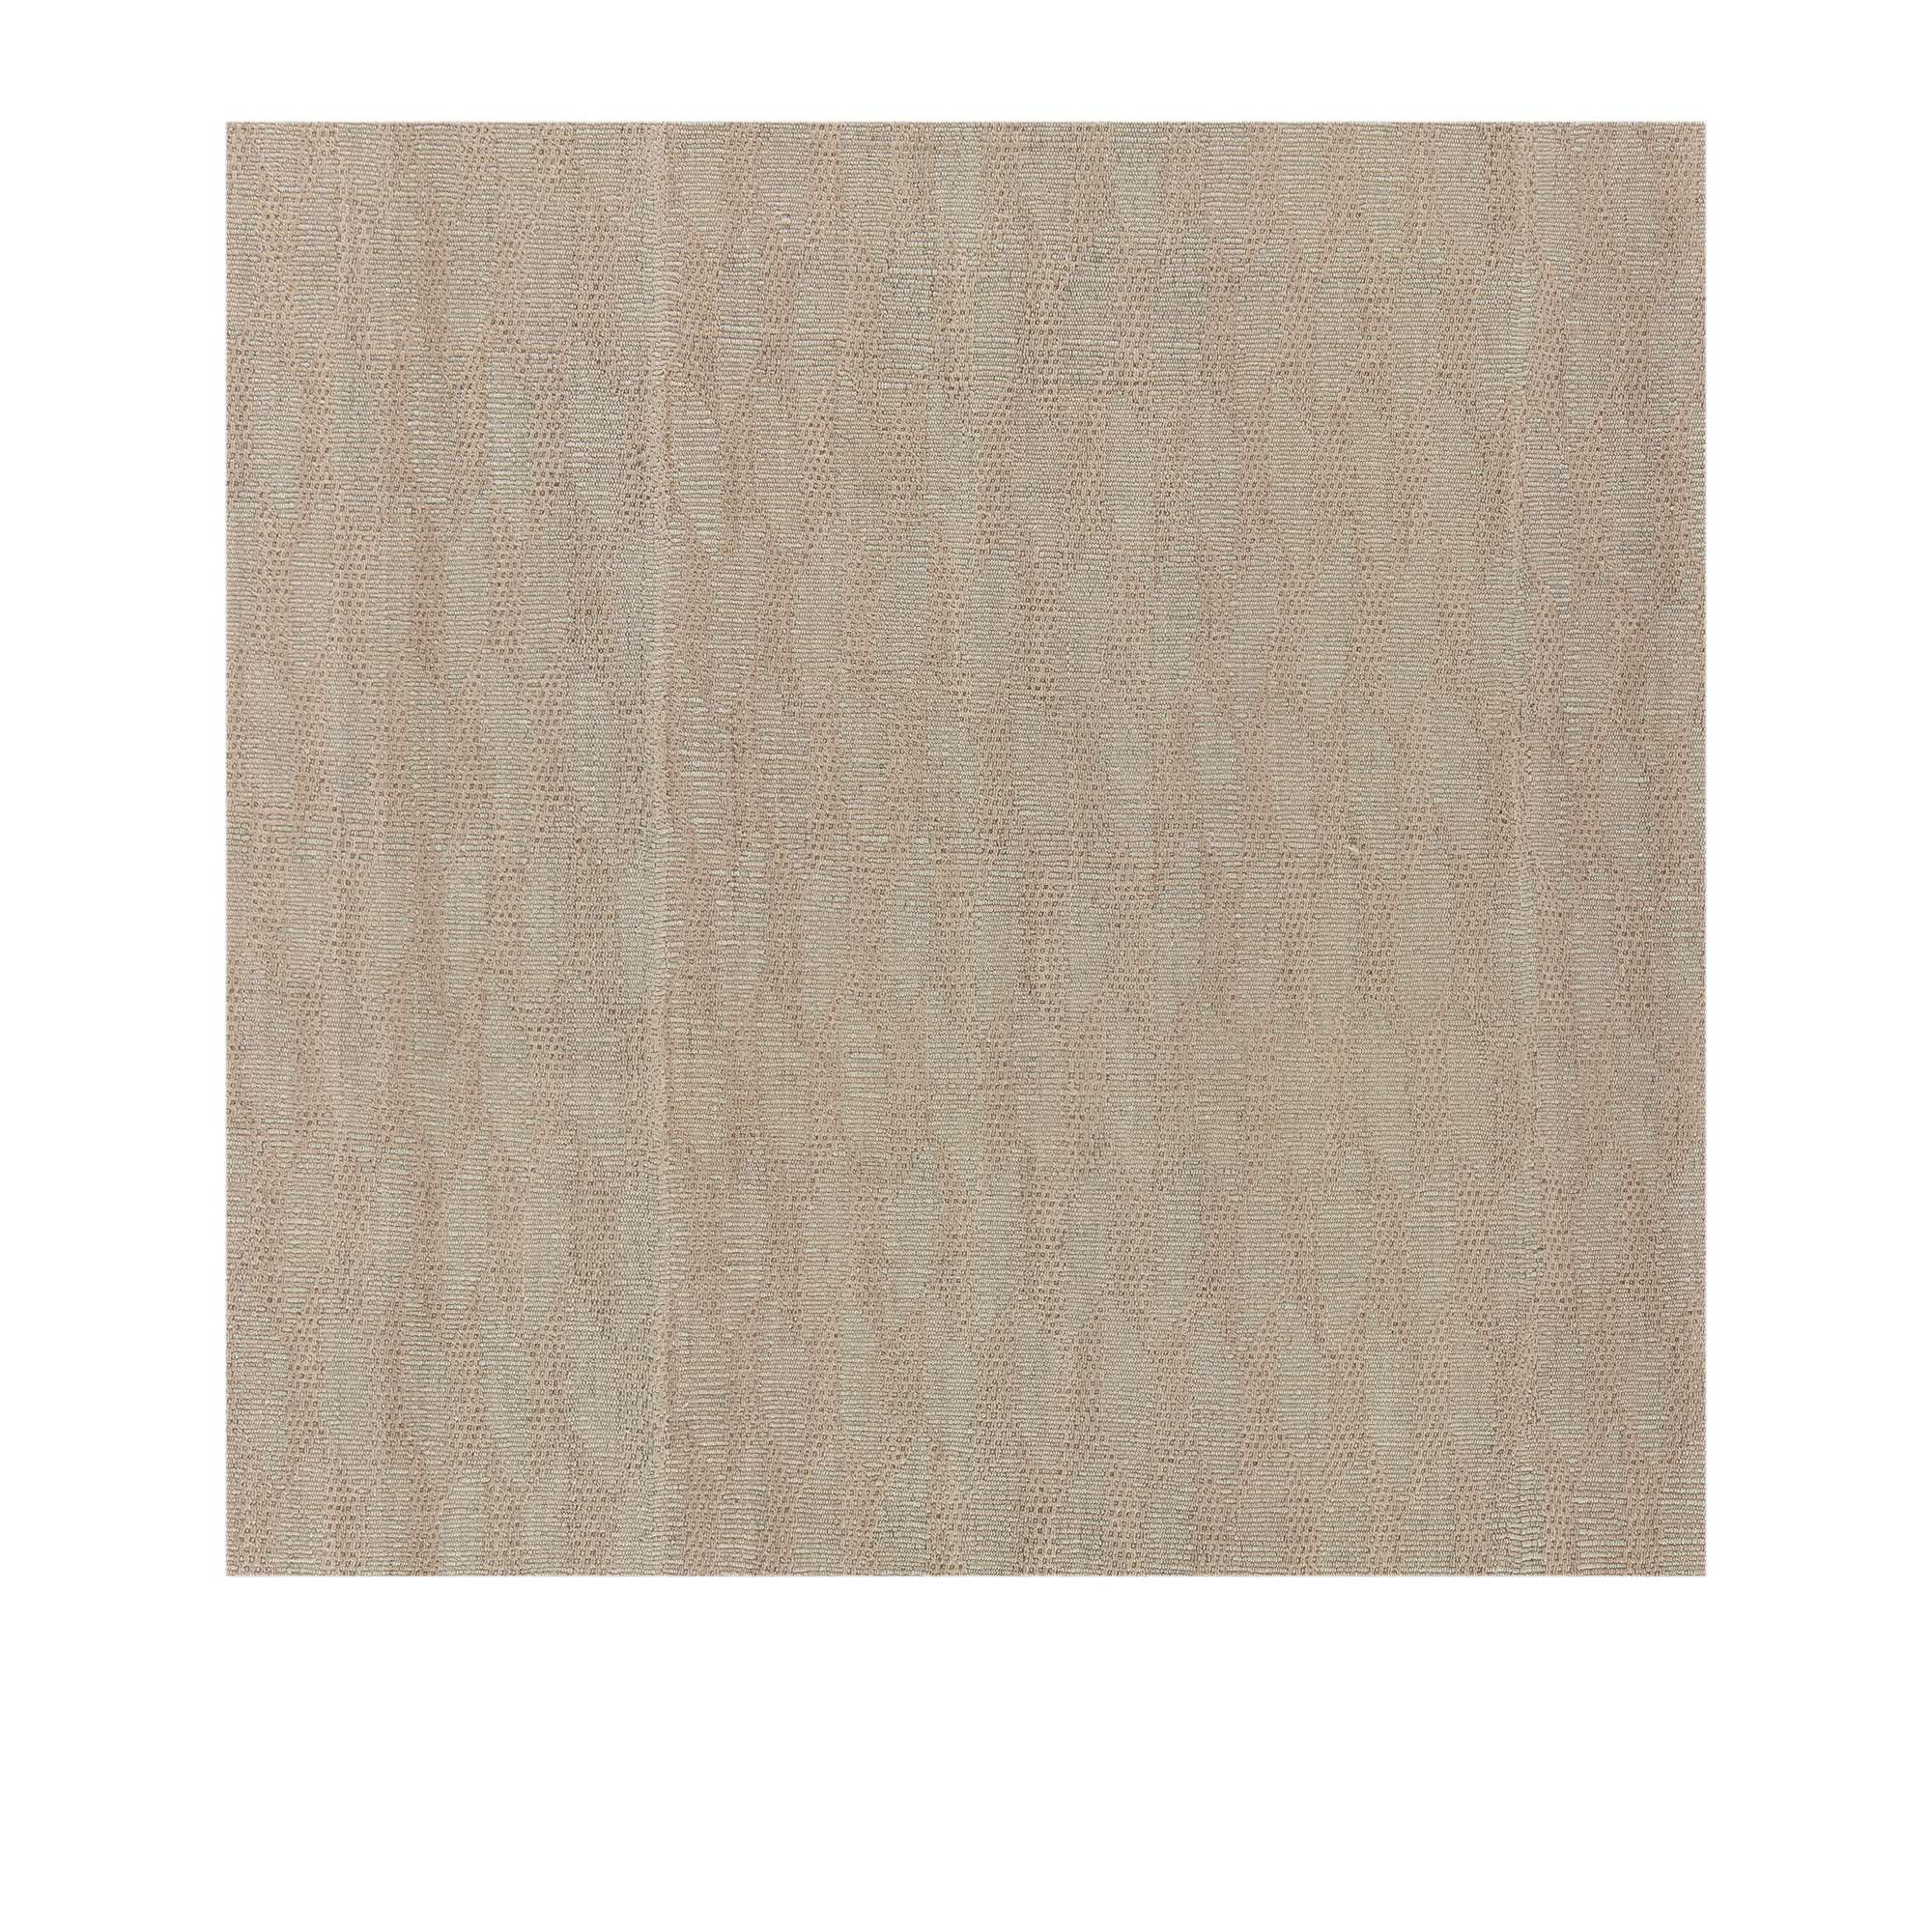 This Pelas Spearhead flatweave rug is made with handspun wool and natural dyes. 